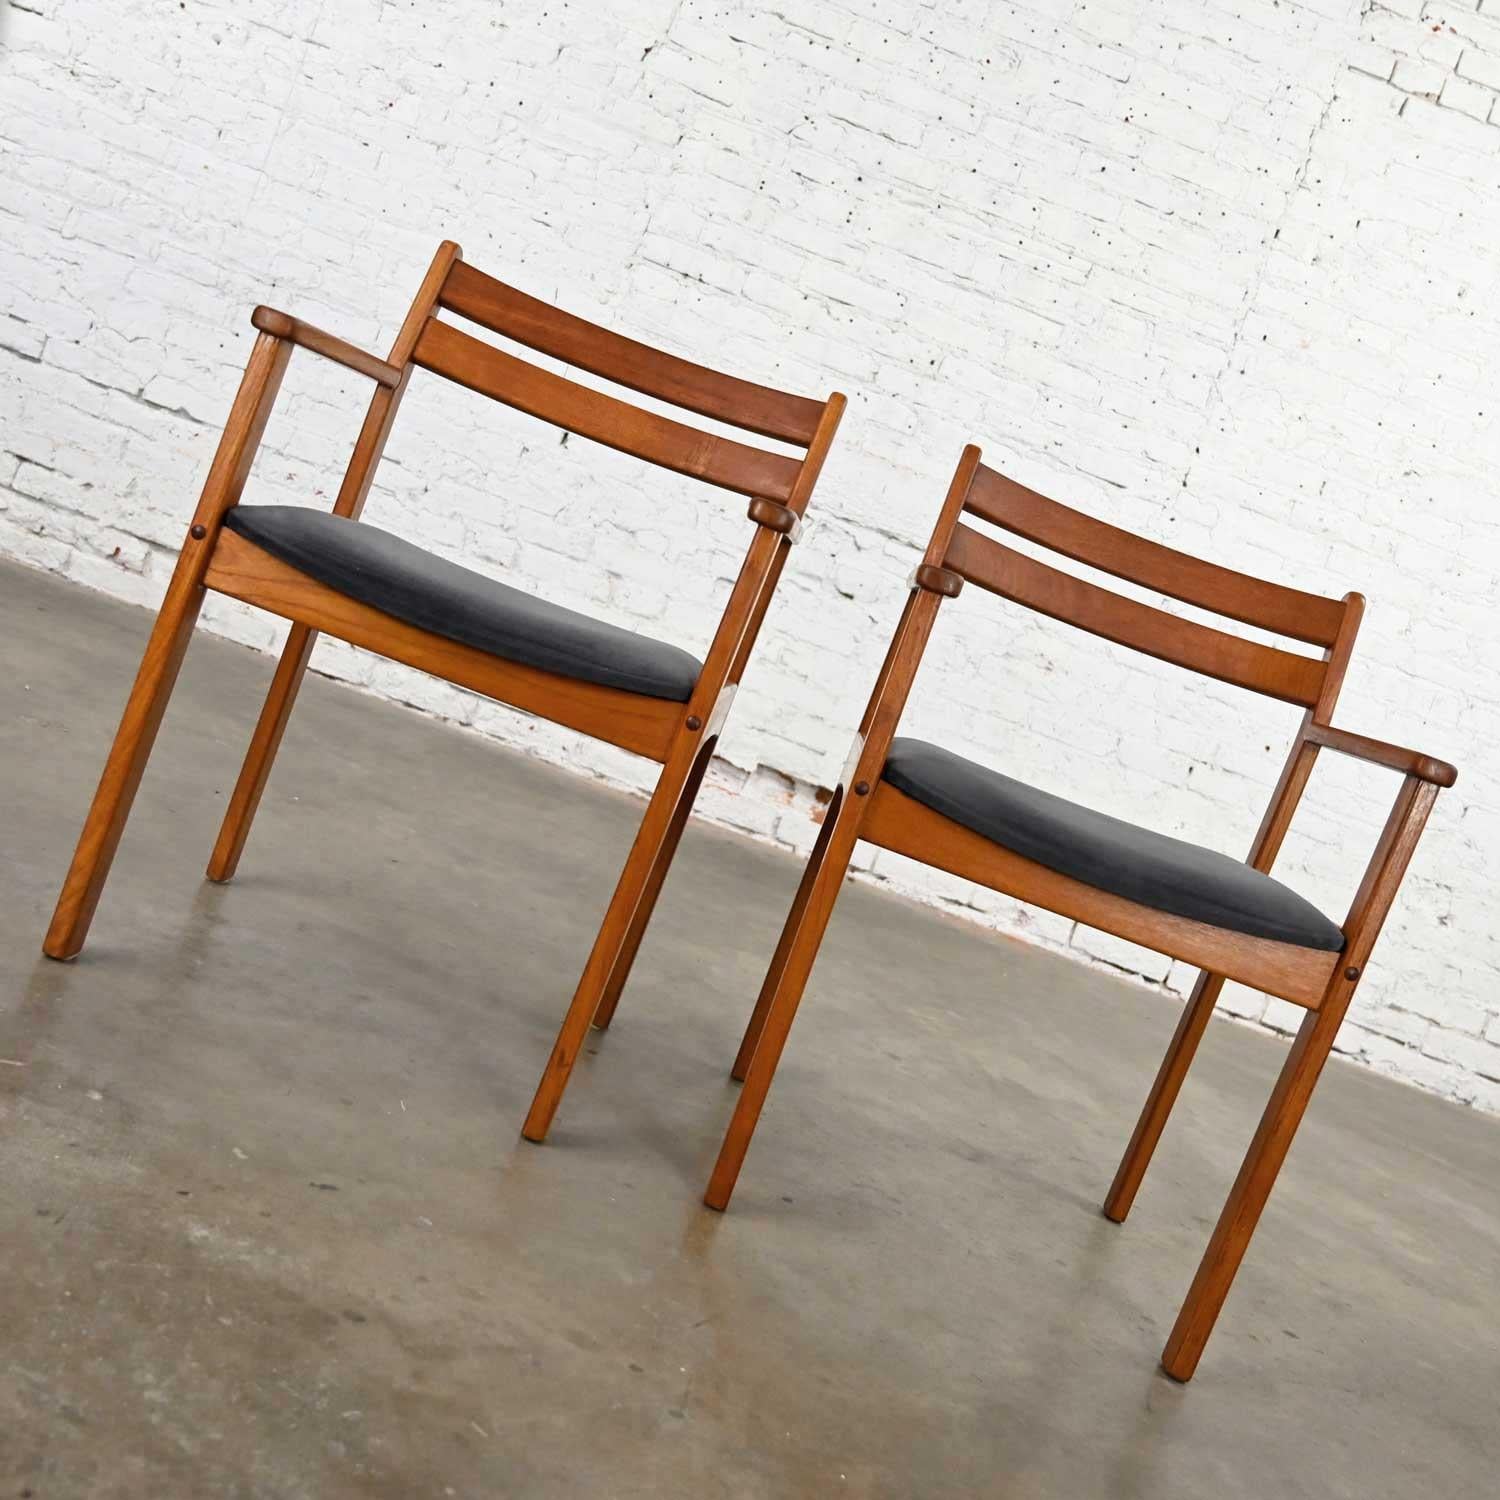 Stunning Scandinavian Modern teak pair of armchairs with their original brushed charcoal fabric seat cushions. These are marked made in Denmark, but we have been unable to identify maker. Beautiful condition, keeping in mind that these are vintage